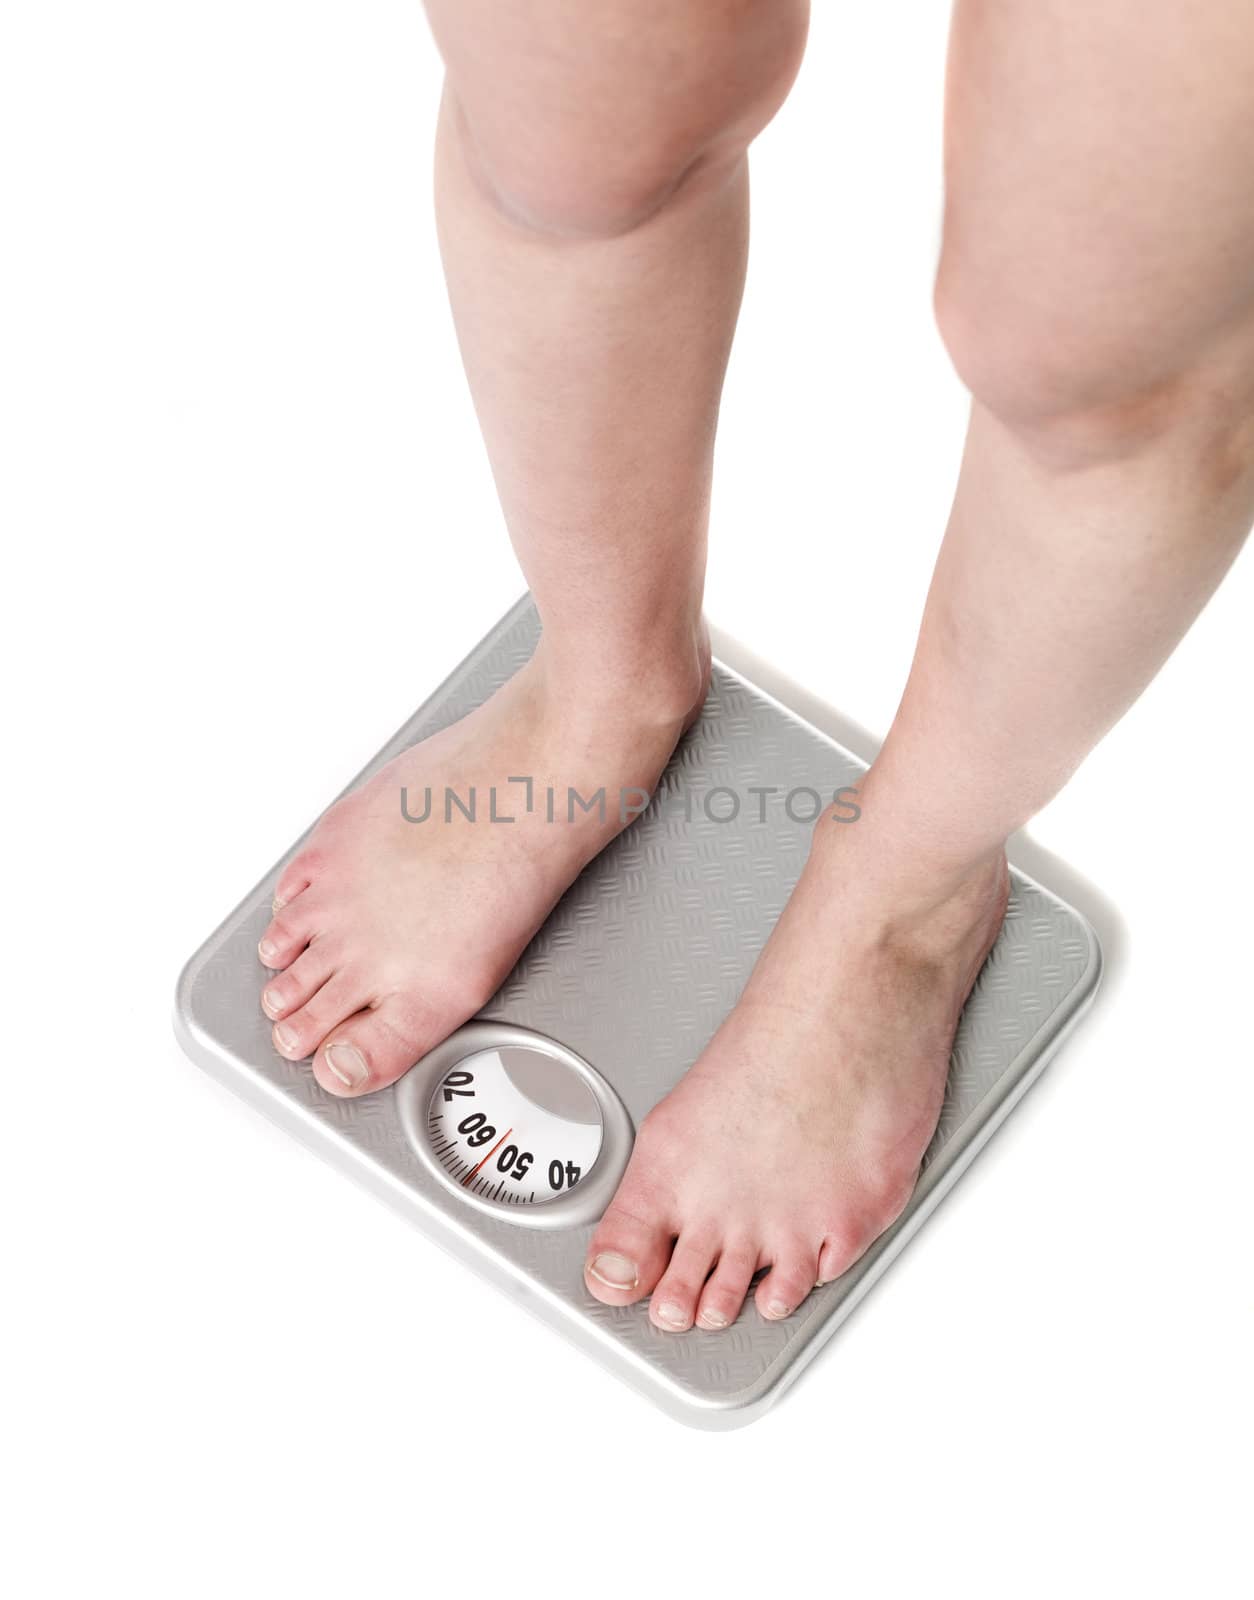 Standing on a weight-scale